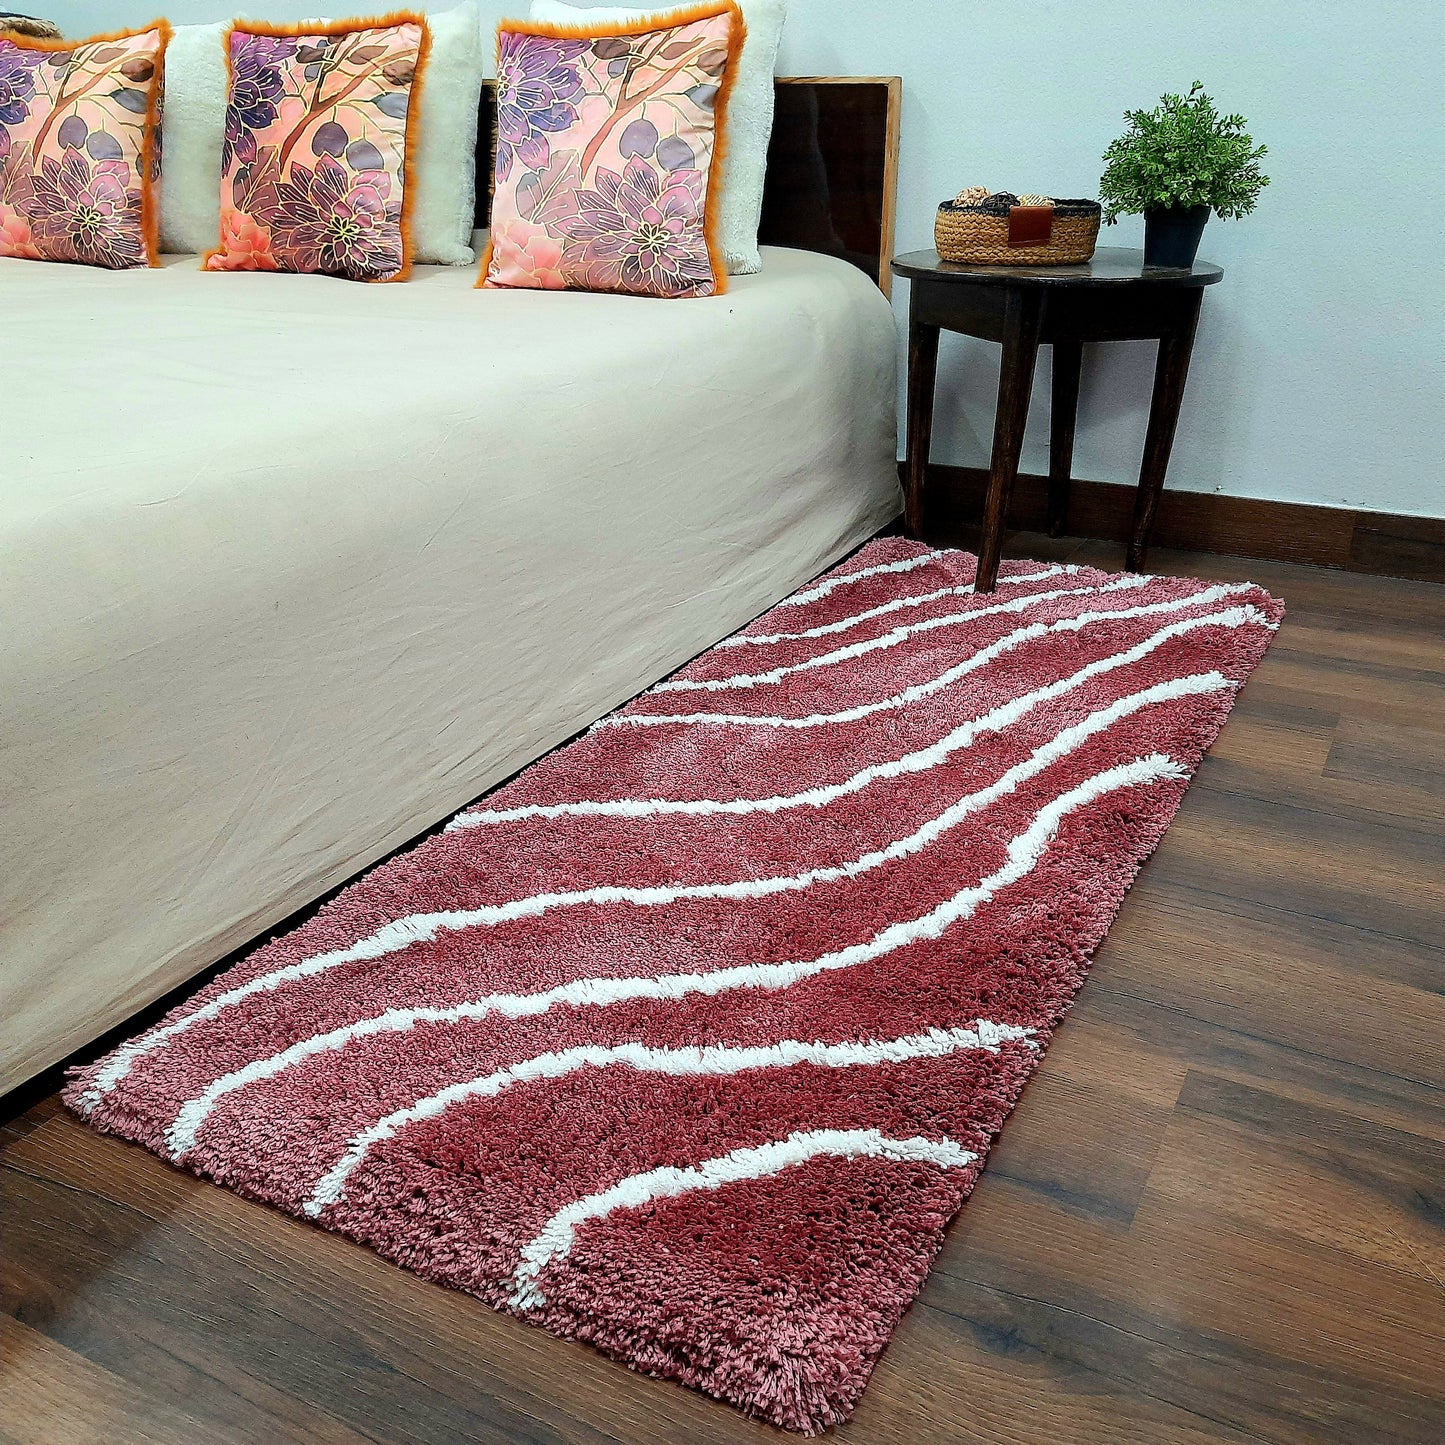 Plush Soft Washable Shaggy Carpet in Wine Color With White Wave Design /Bedside Runners by Avioni Home